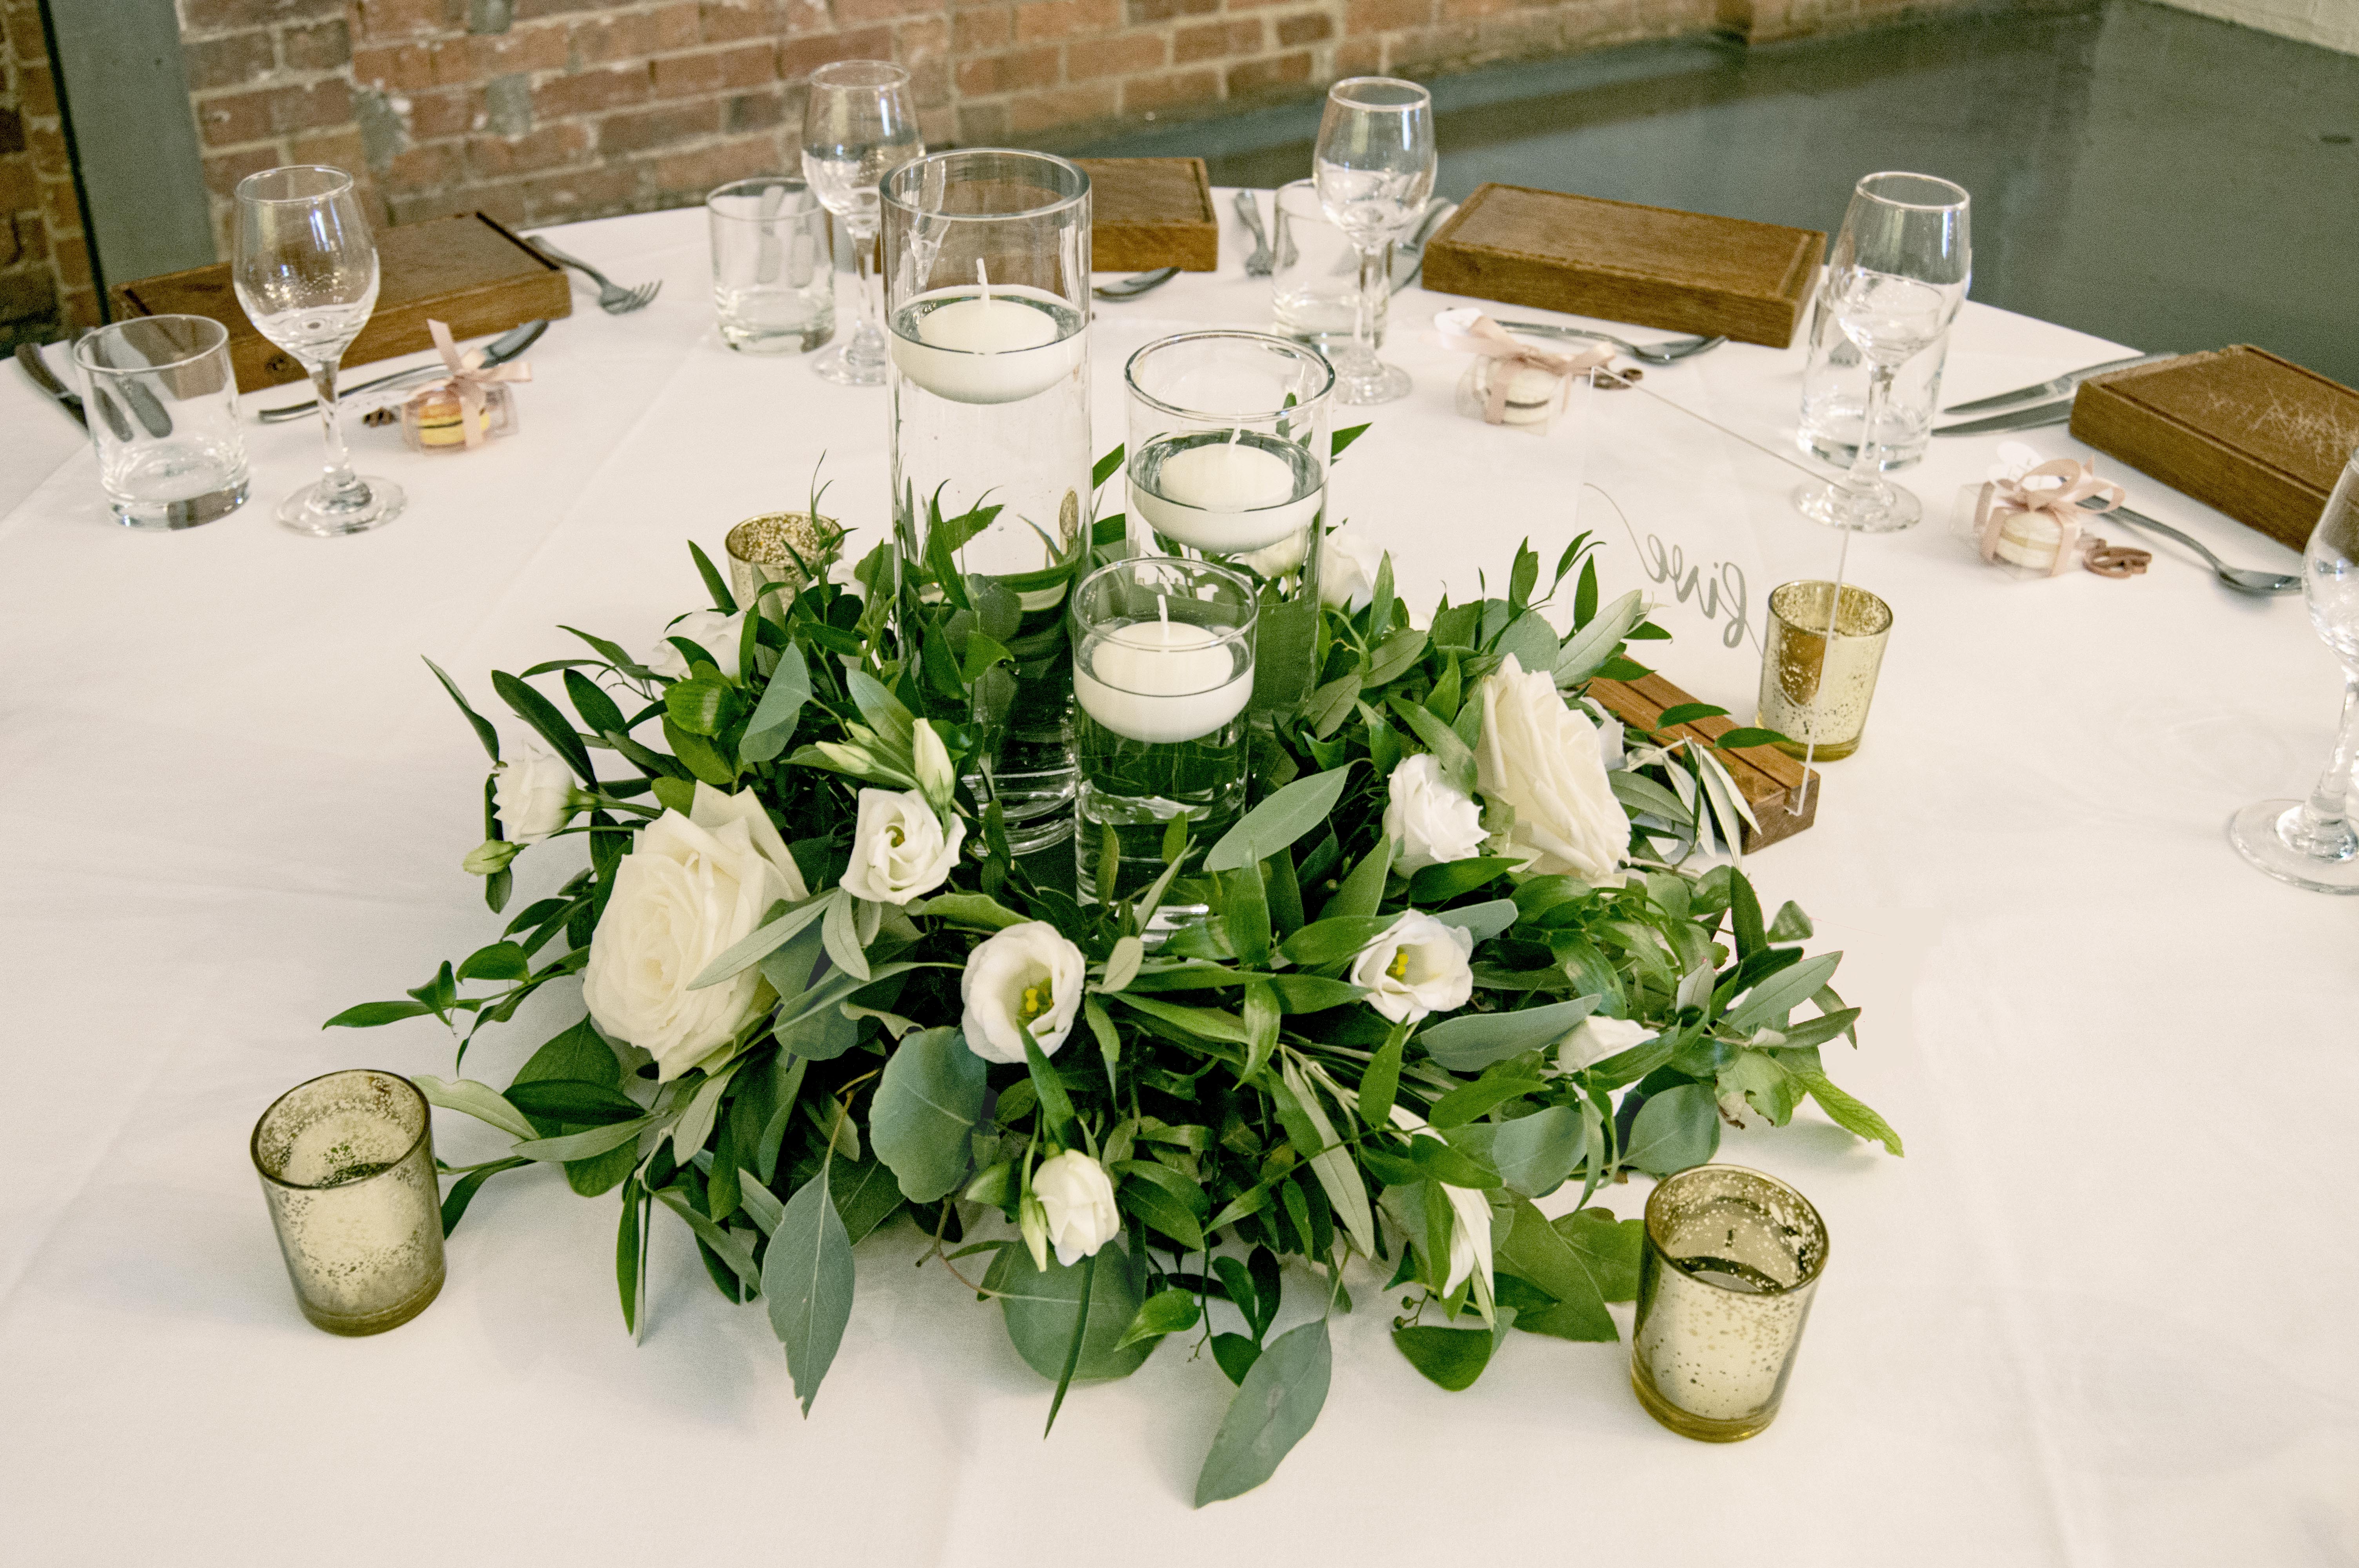 floating-candles-foliage-centerpiece- Grid No Space 5 Columns